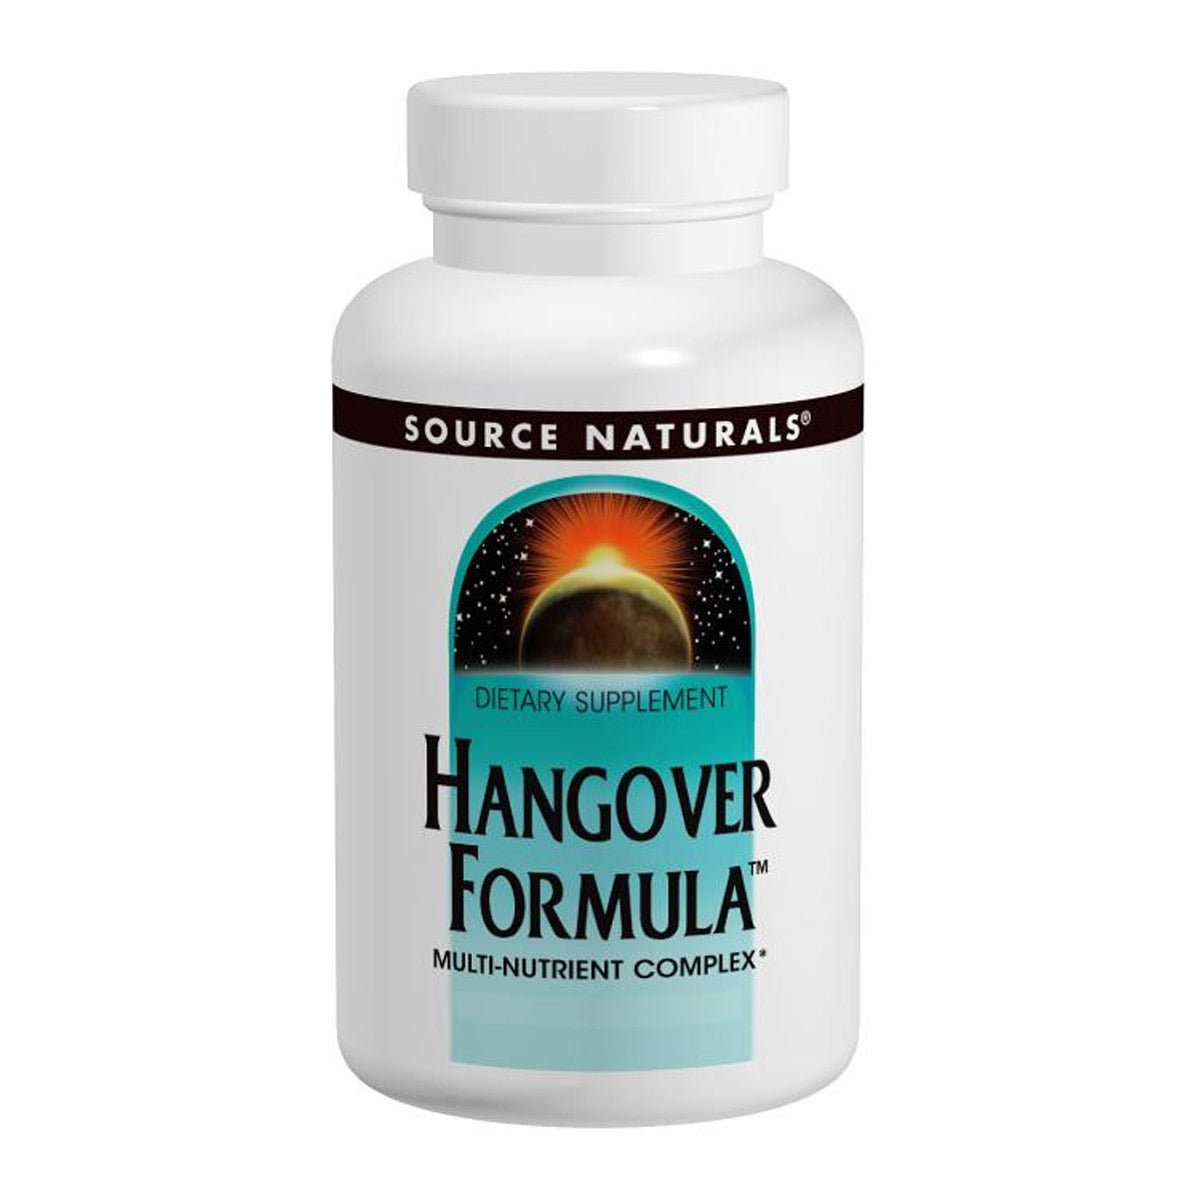 Primary image of Hangover Formula